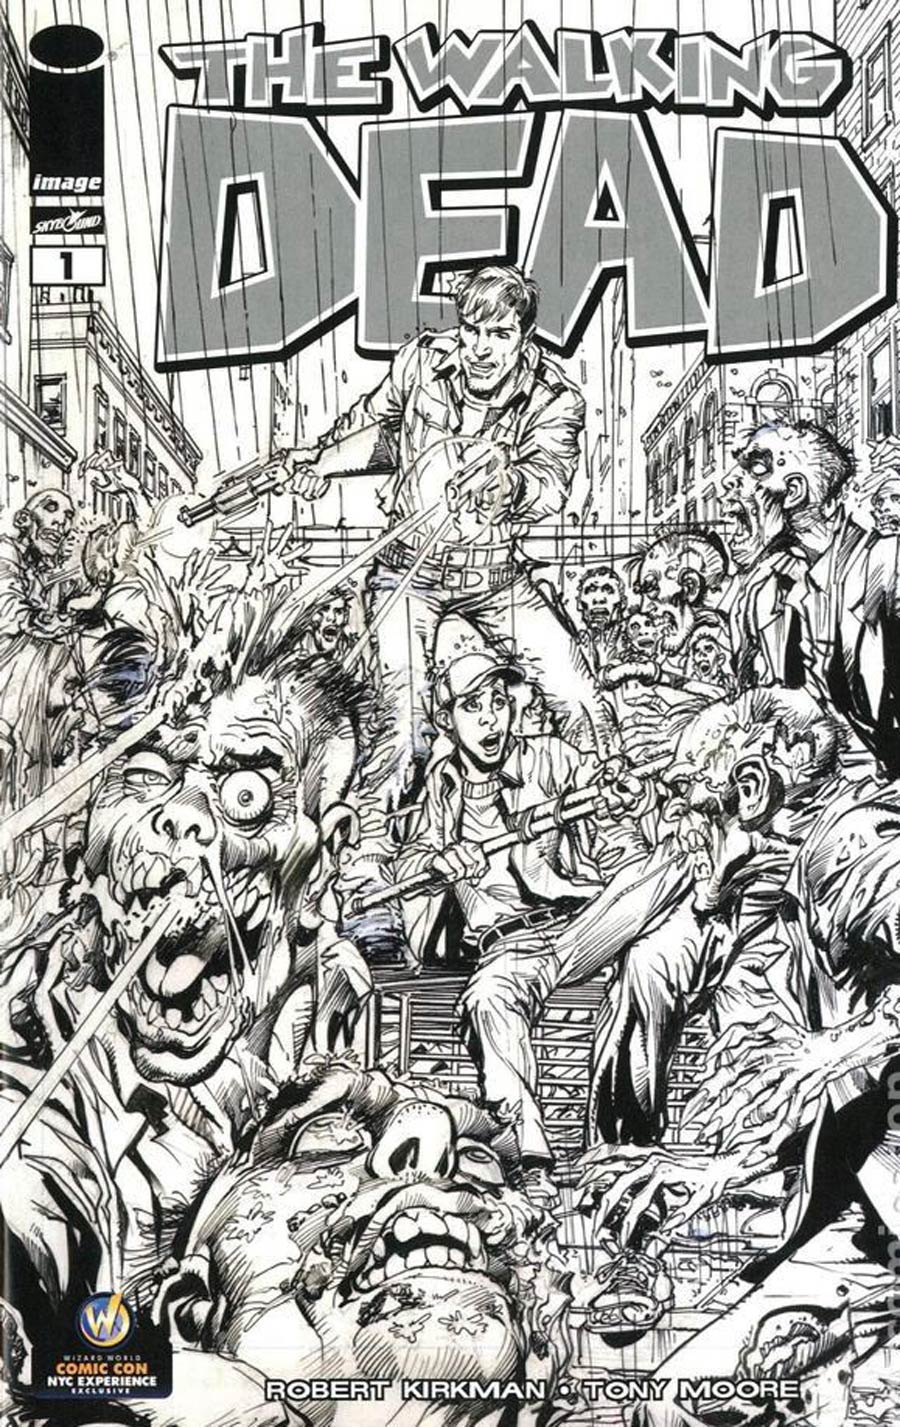 Walking Dead #1 Wizard World Neal Adams Black and White NYC Variant